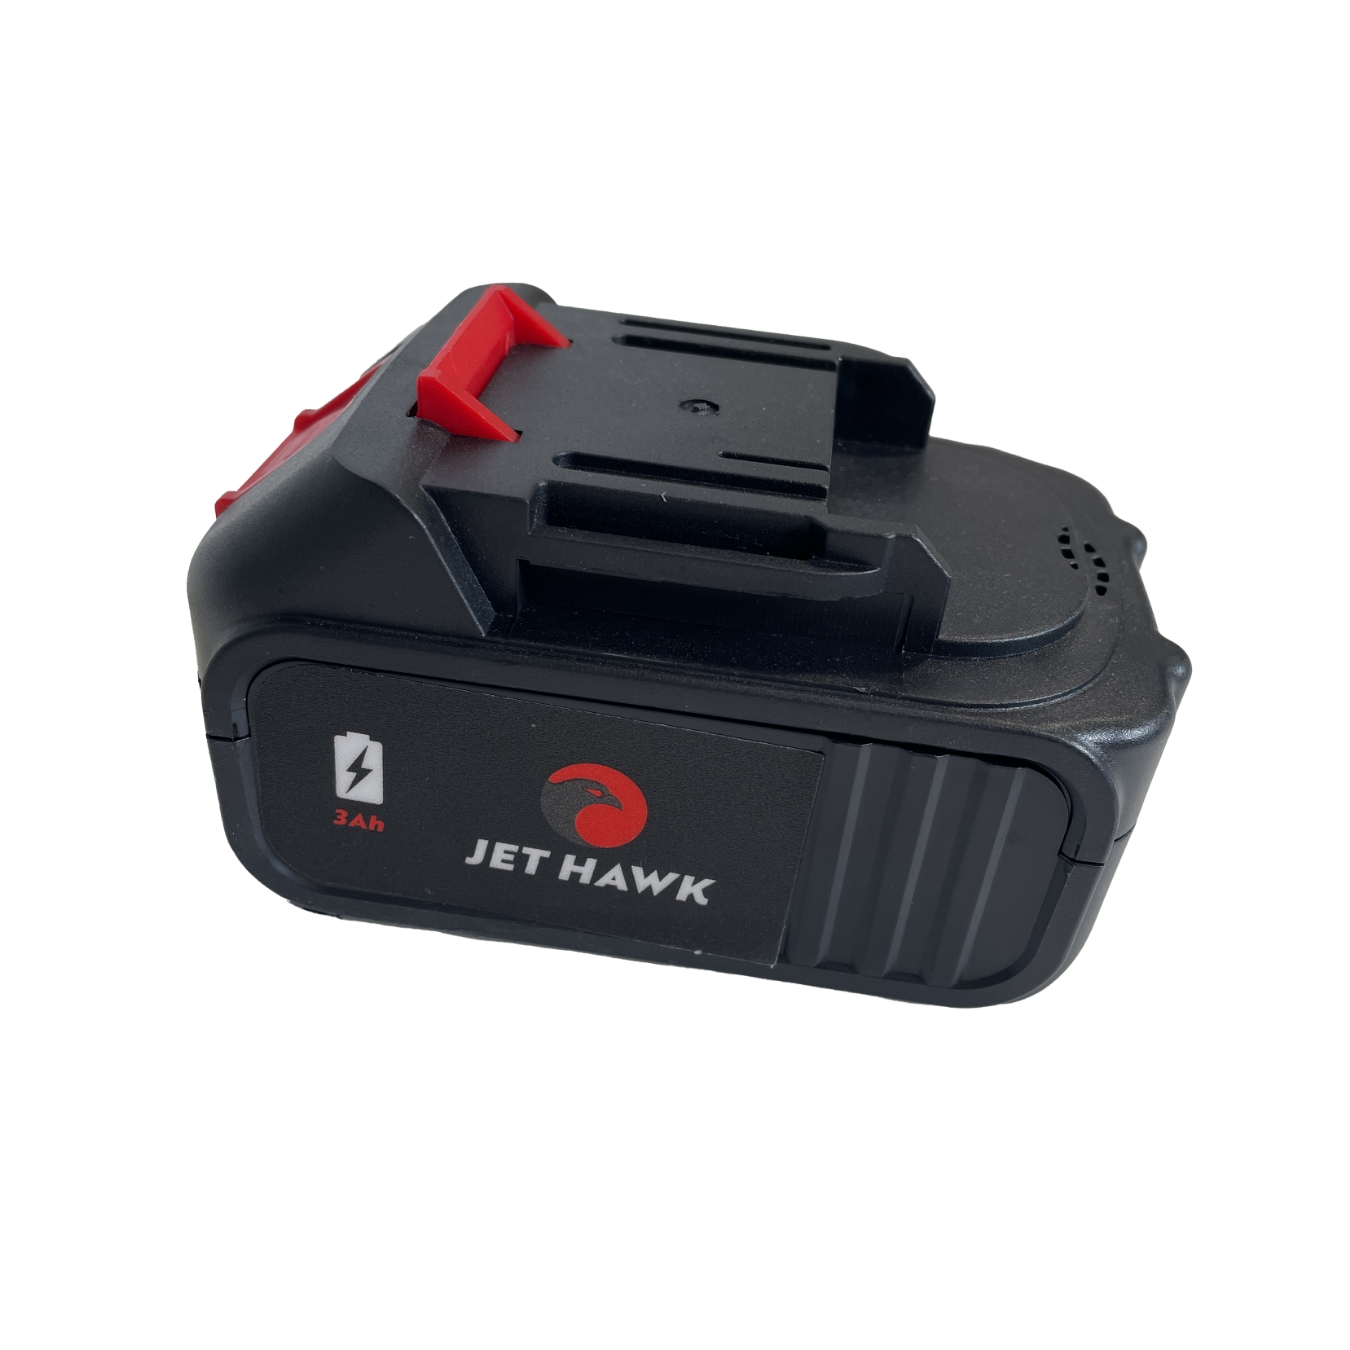 View Jet Hawk Additional Battery information